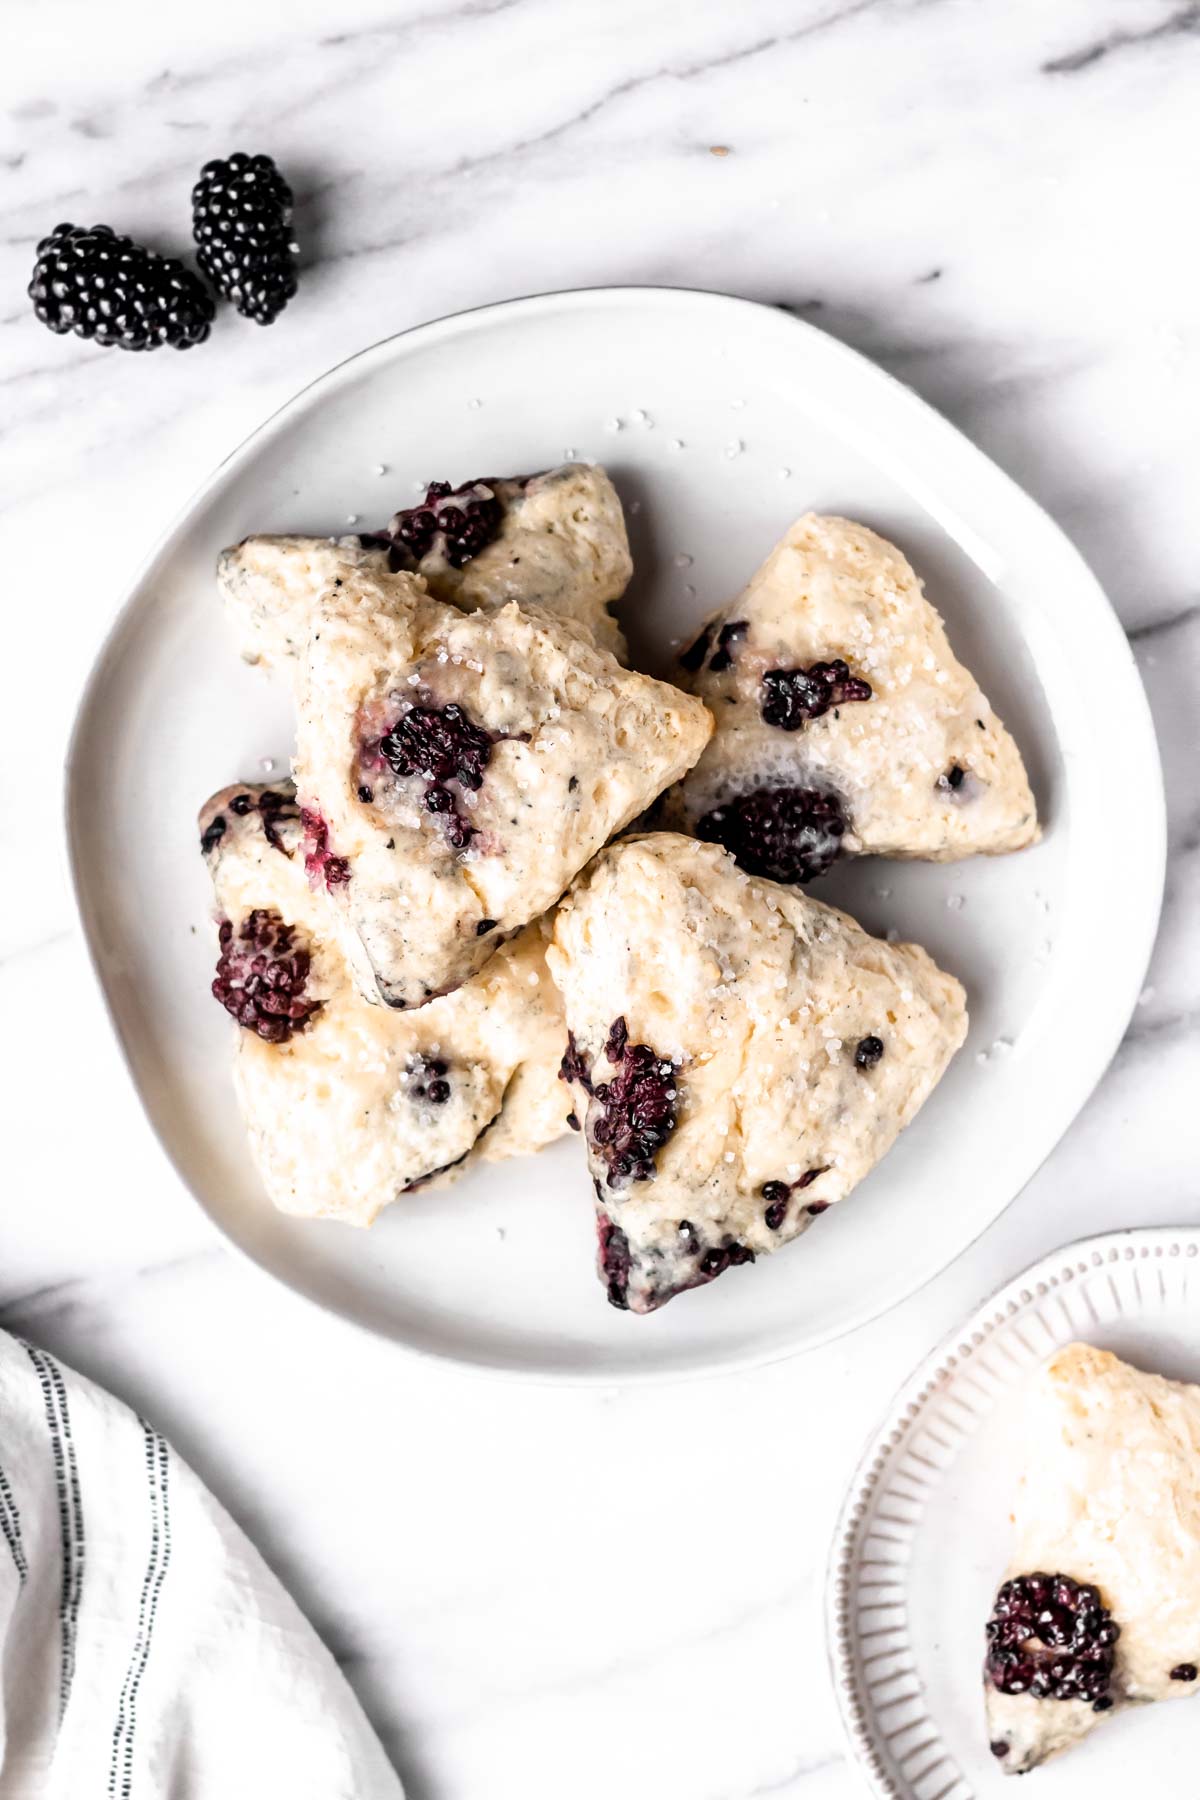 Overhead view of blackberry scones on a plate with a single one on a smaller plate, a white towel and extra blackberries.